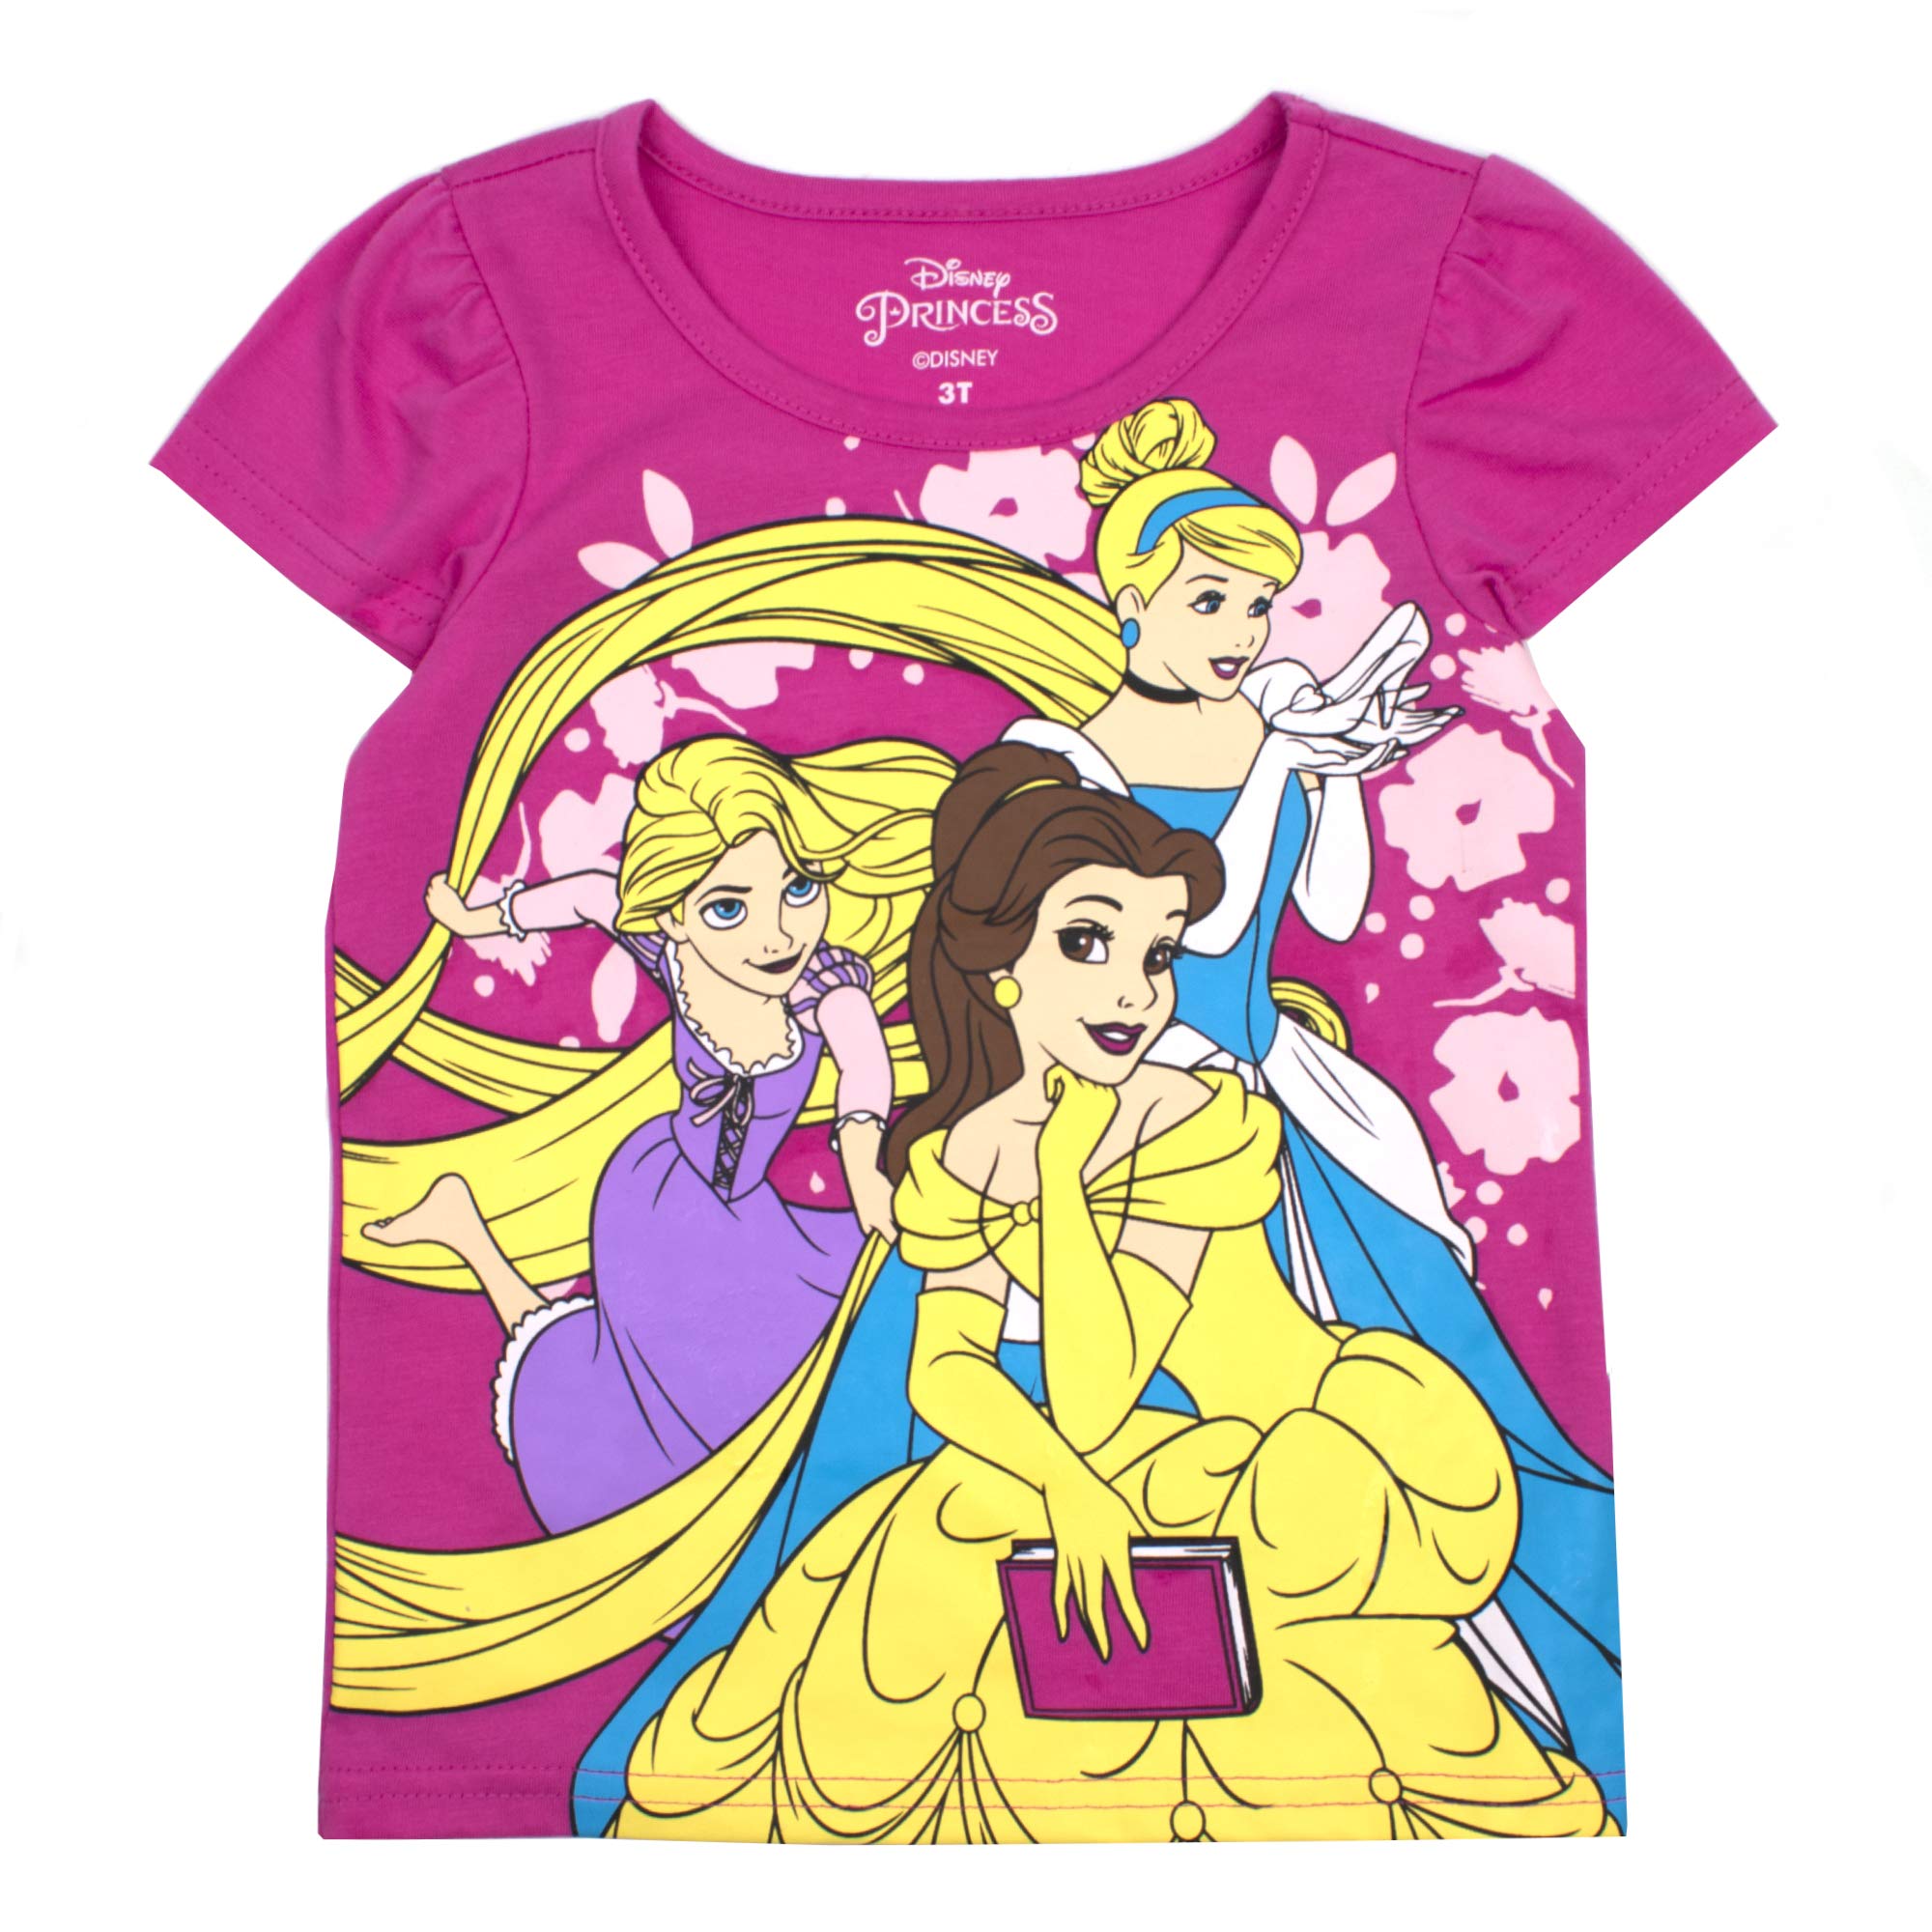 Disney Princesses Girls 3 Pack T-Shirts for Toddler and Little Kids – Pink/White/Grey